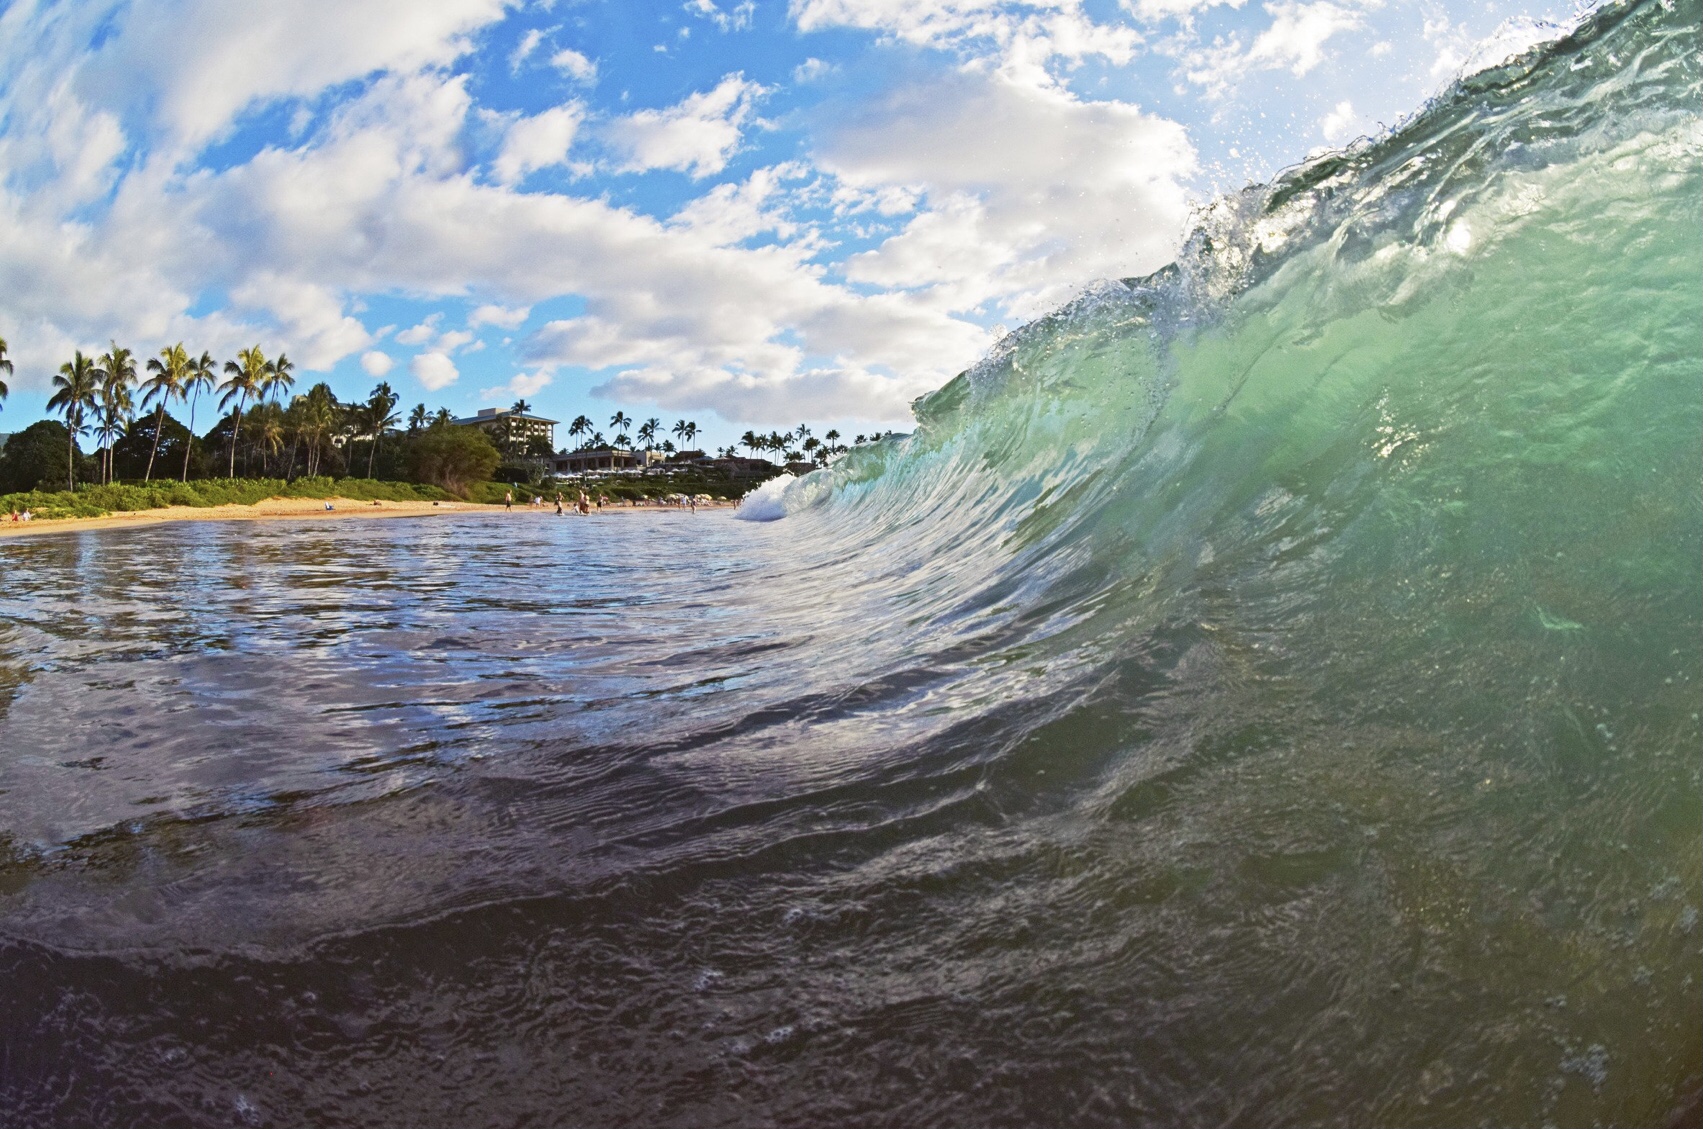 Maui waves are one of the attractions on the island